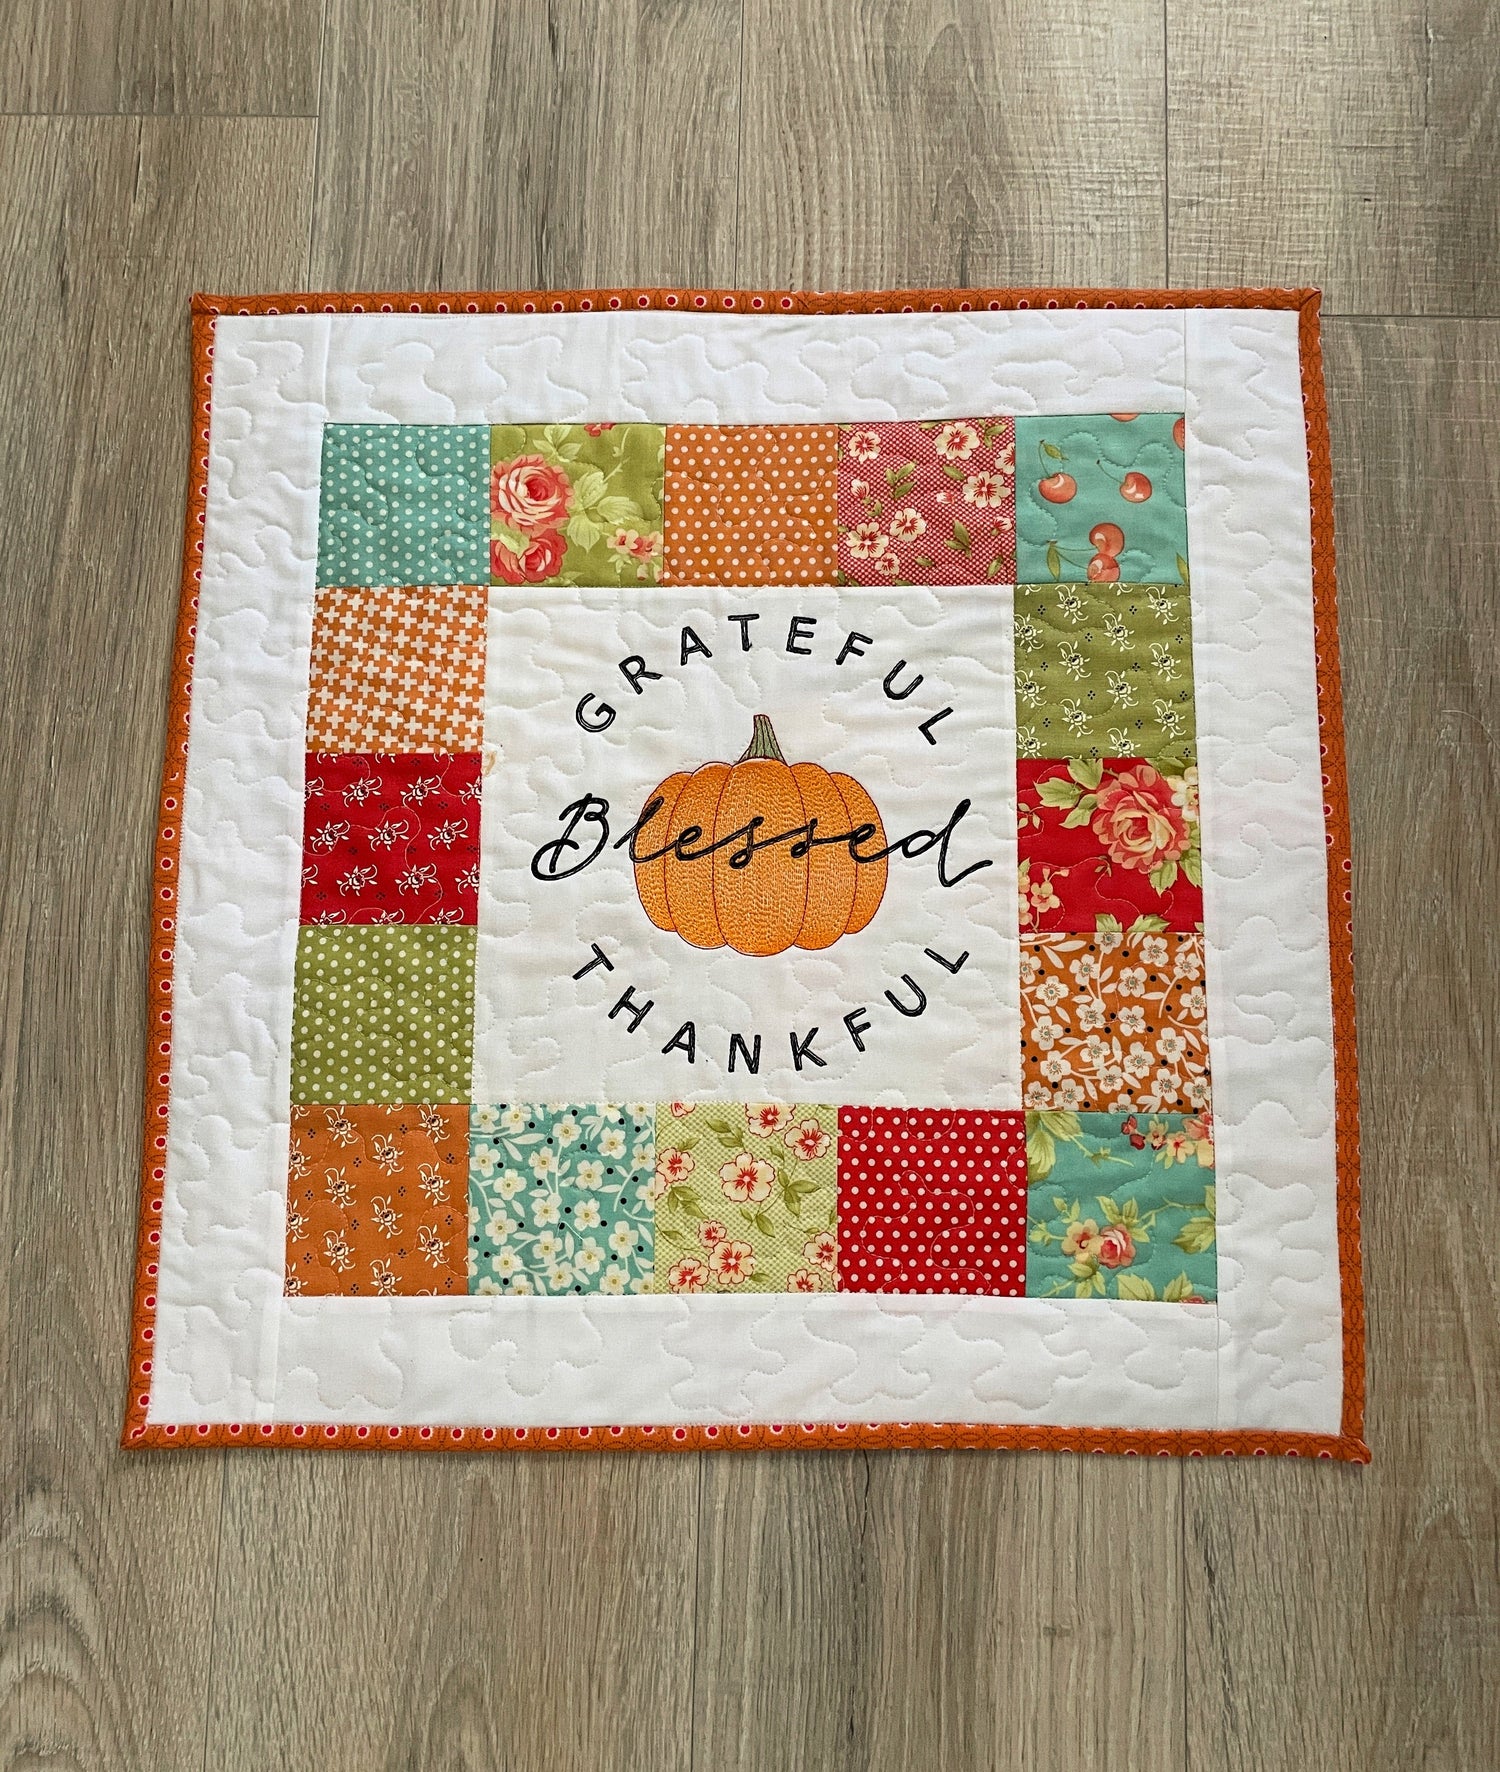 Quilted Fall patchwork mini quilt with embroidered pumpkin in the center and text Grateful, Blessed, Thankful